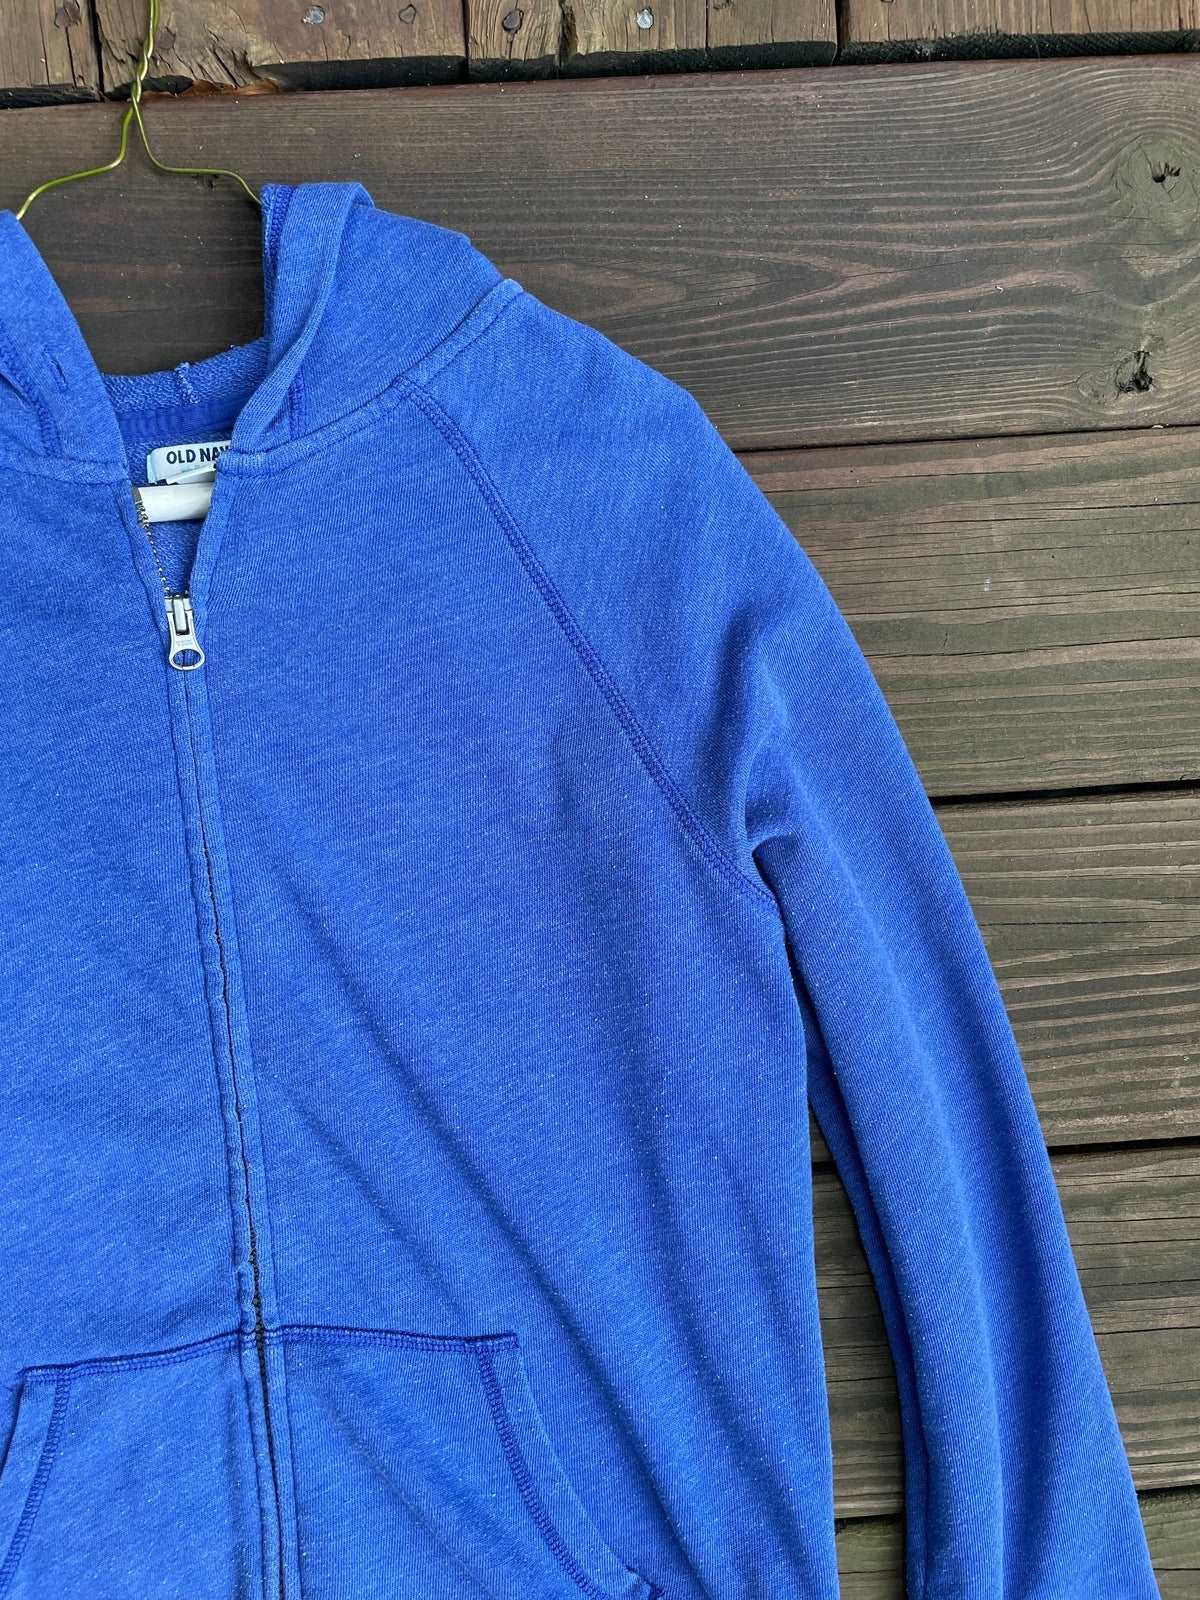 ThriftedEquestrian Clothing Small Old Navy Zip-Up Hoodie - Small